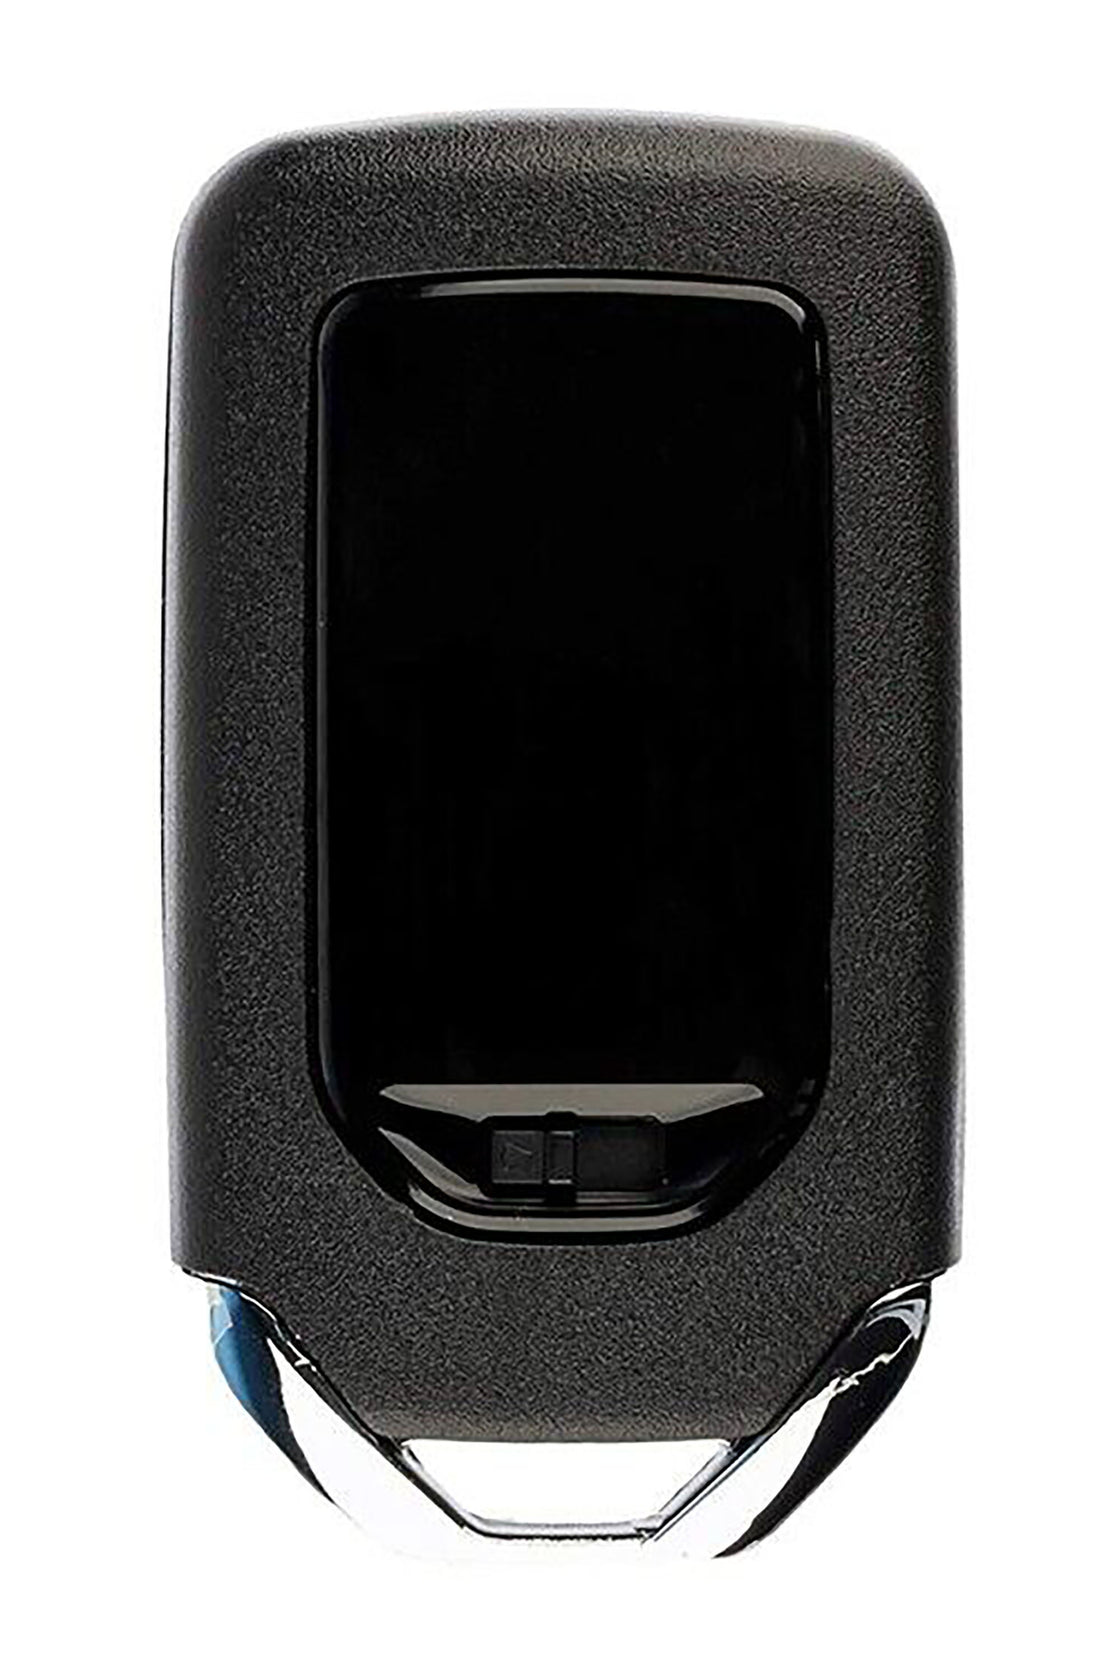 1x New Replacement Proximity Remote Key Fob Compatible with & Fit For Honda Vehicles KR5V2X - MPN A2C97488400-02